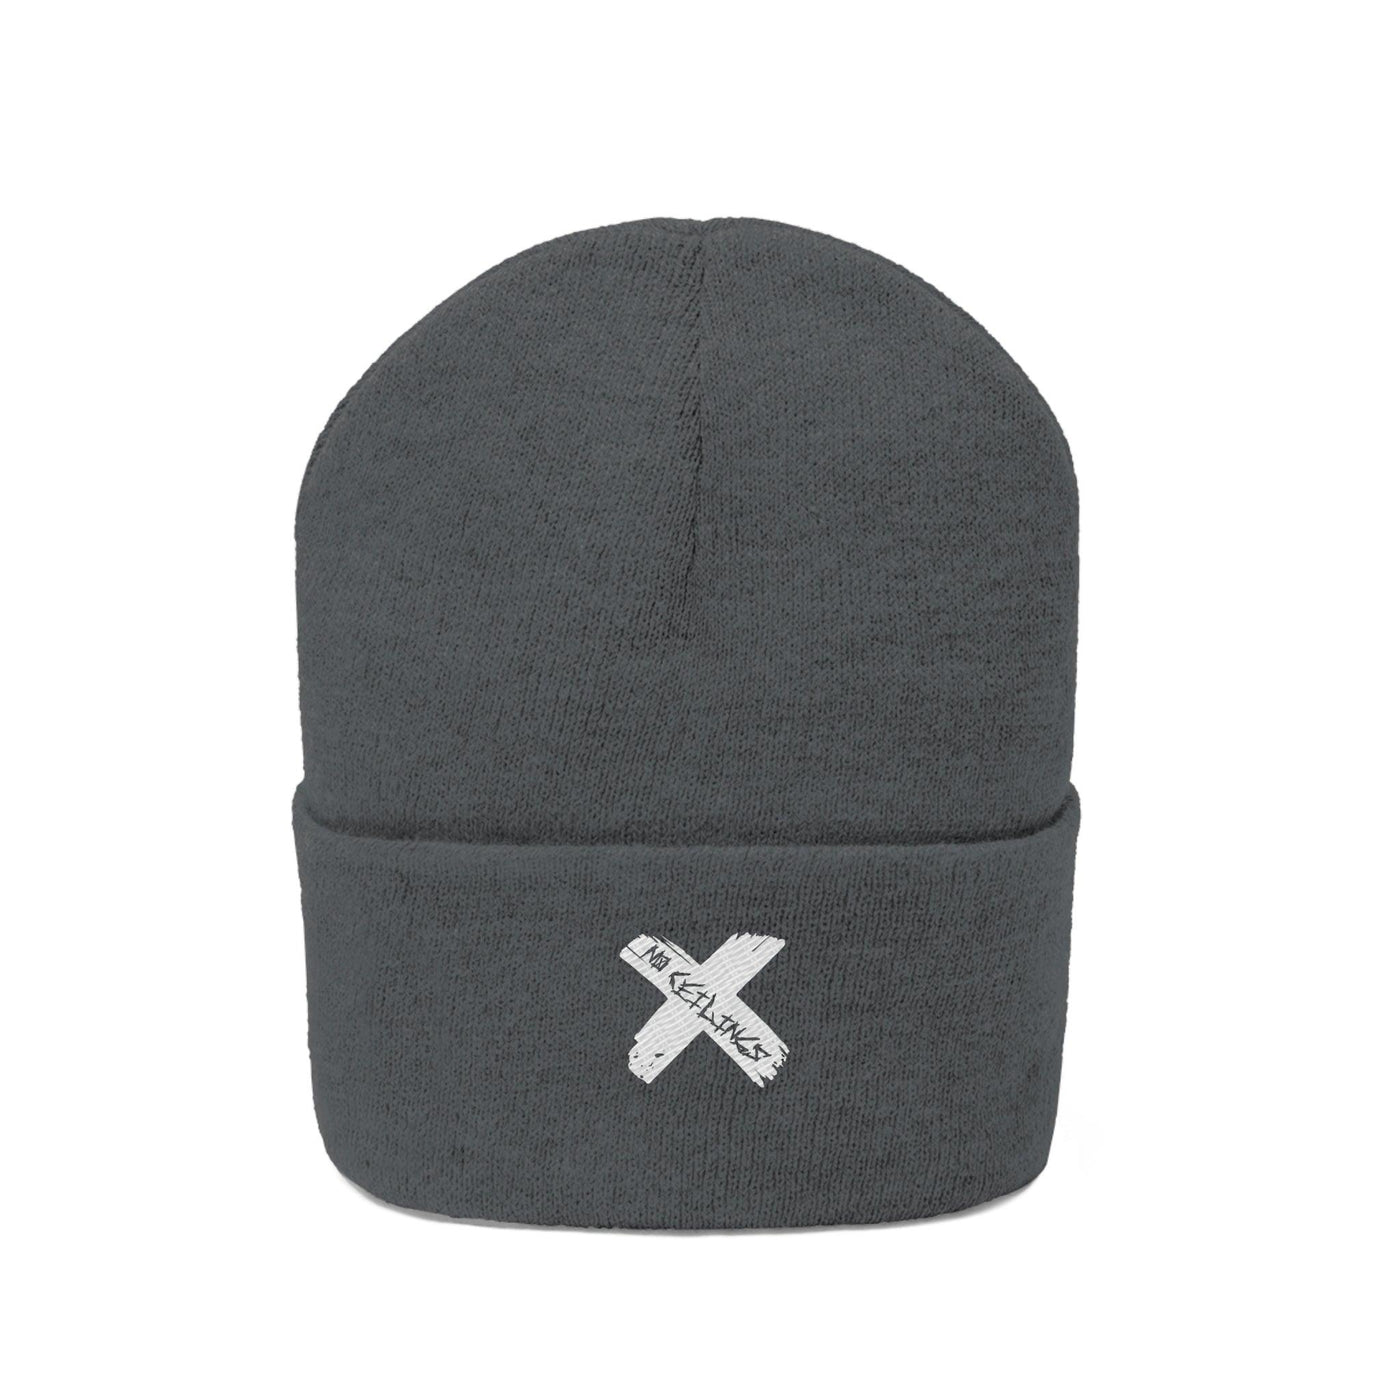 X Style Knit Beanie - NoCeilingsClothing